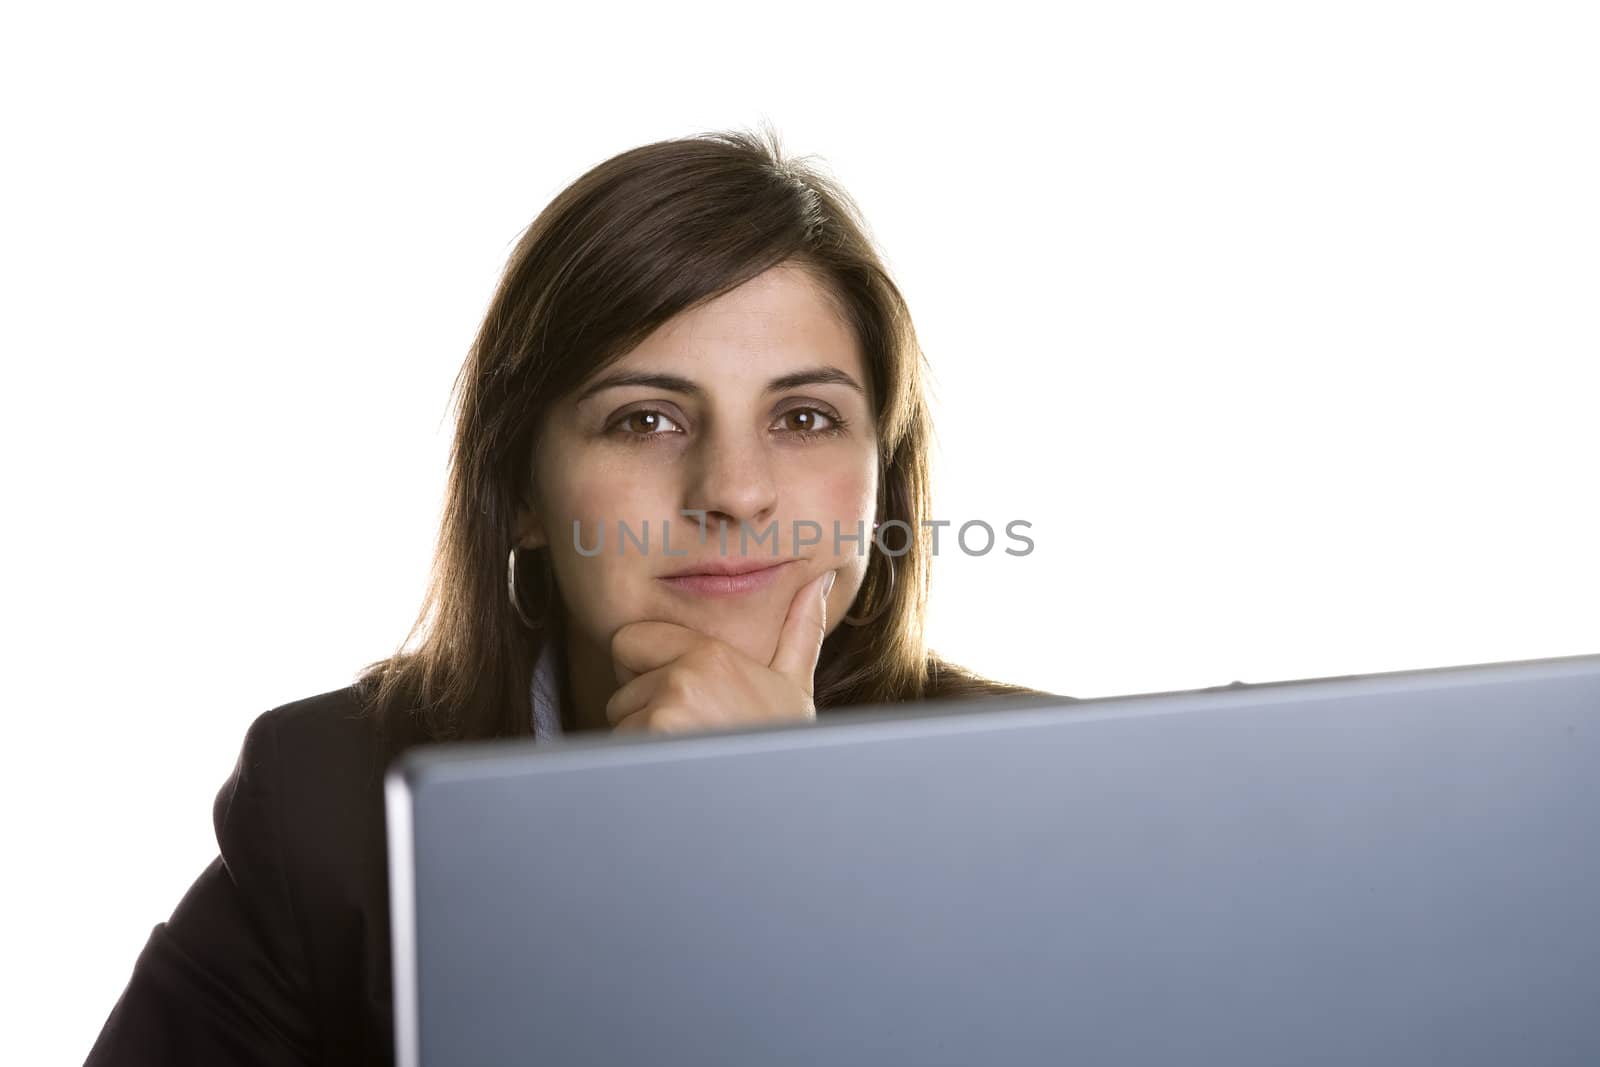 businesswoman with laptop computer isolated on white background - focus on the woman